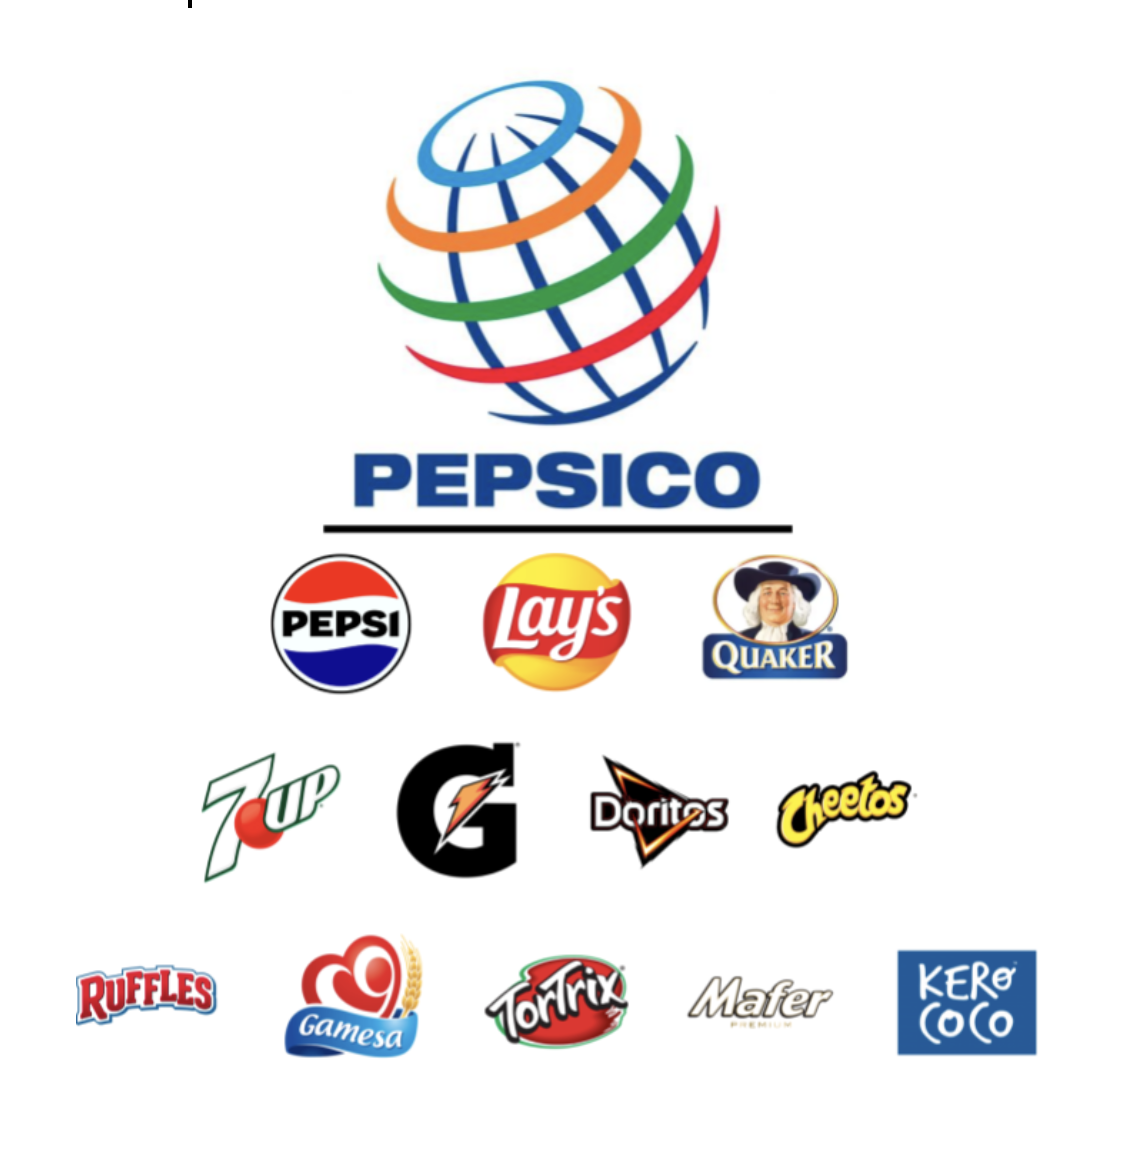 PepsiCo continues to dominate the market with its vast extent of different brands, guaranteeing that one way or another, it will remain at the top. 